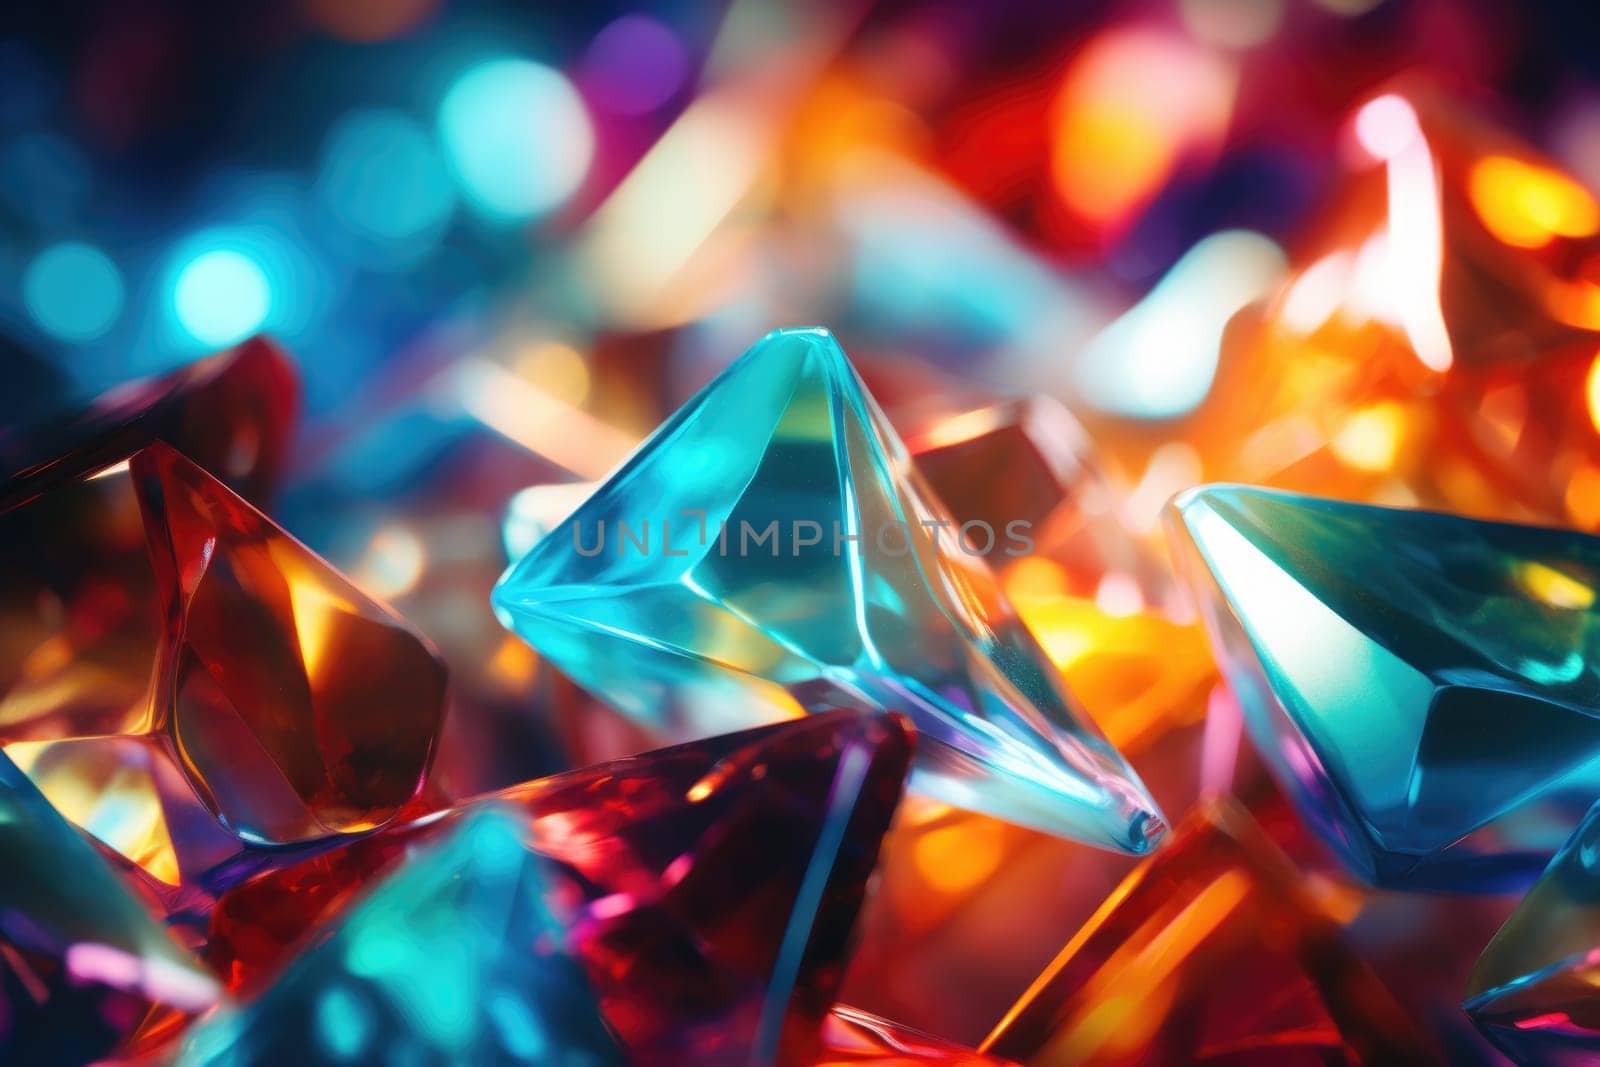 Colourful glass surface and glass fragments close-up in electric neon colours. Abstract background and texture